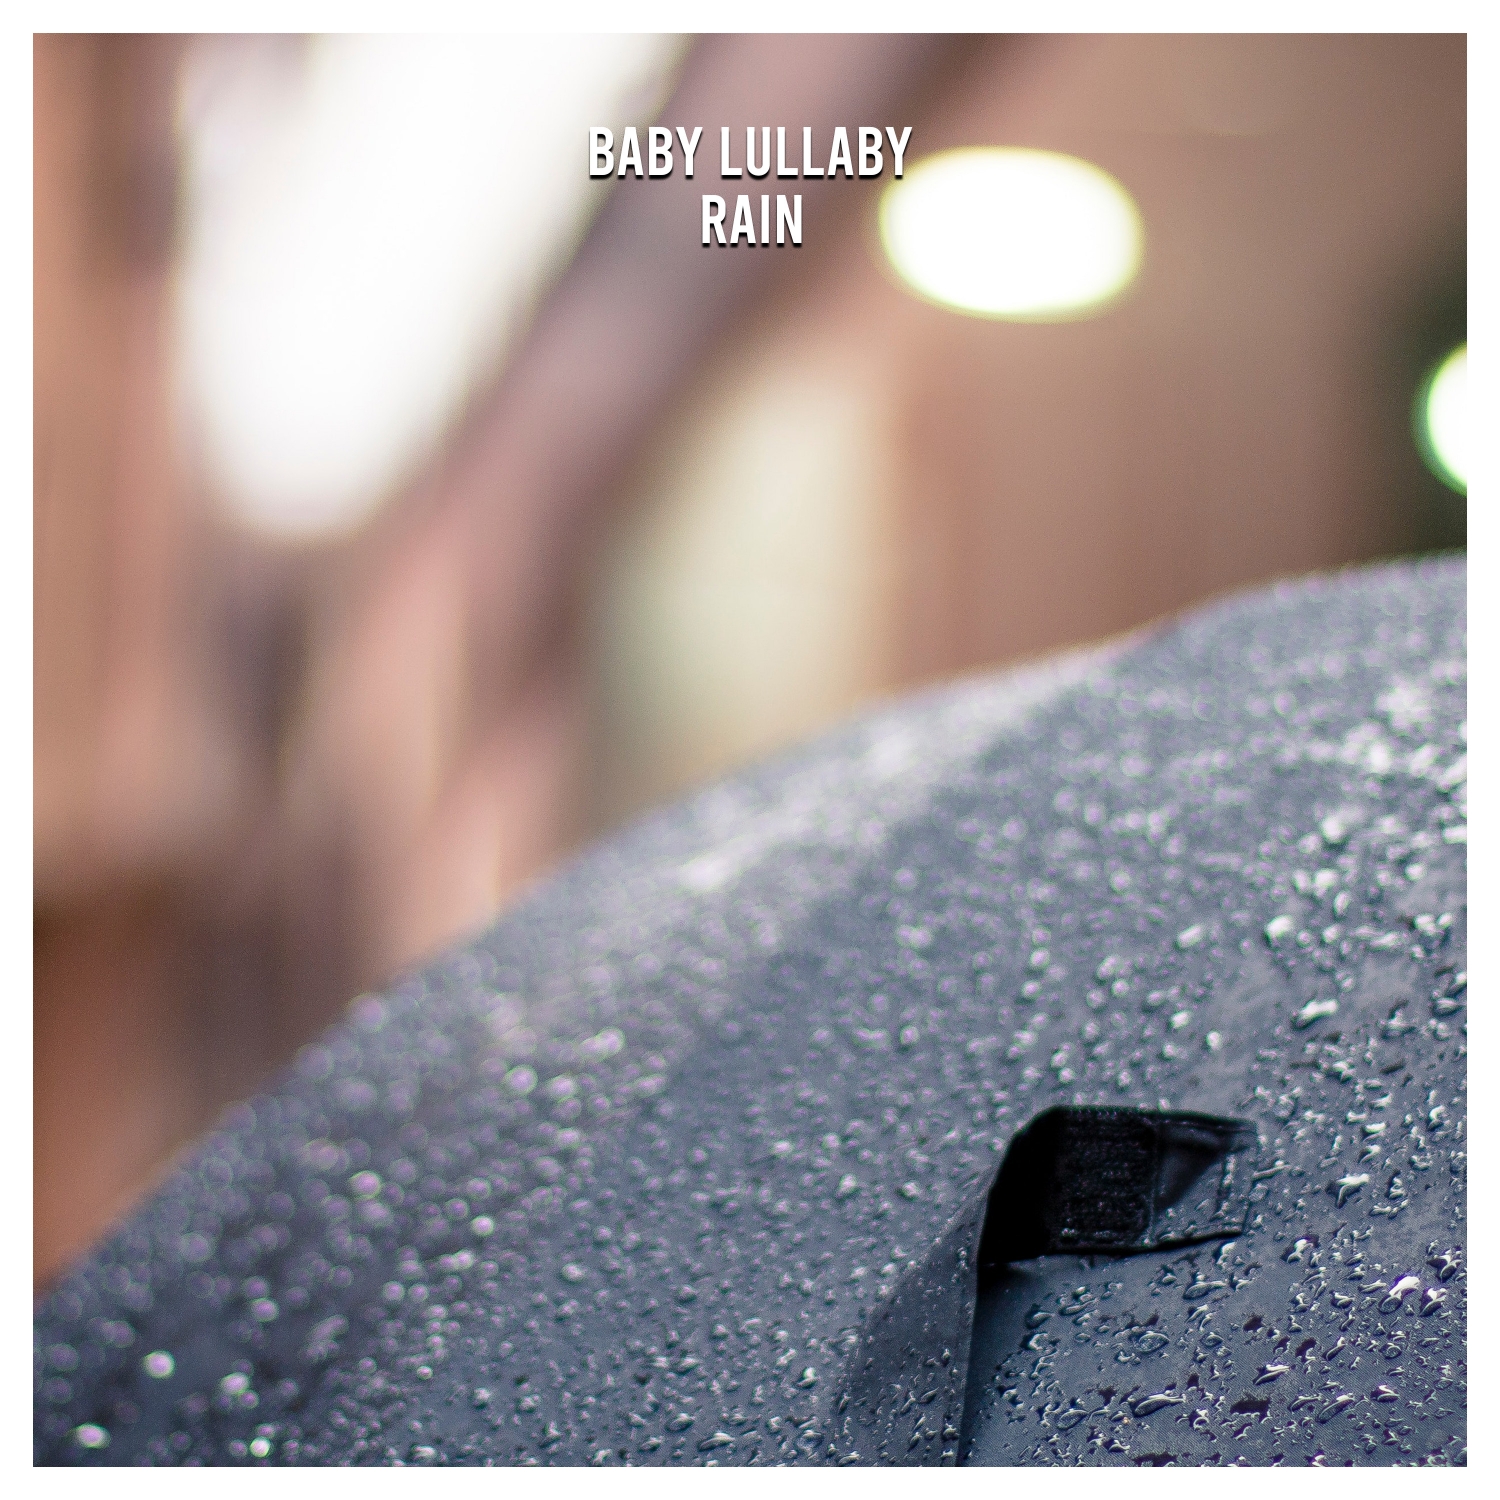 2017 Baby Lullaby Rain Sounds. Cure Sleepless Nights with Soothing Sounds of Natural Rain